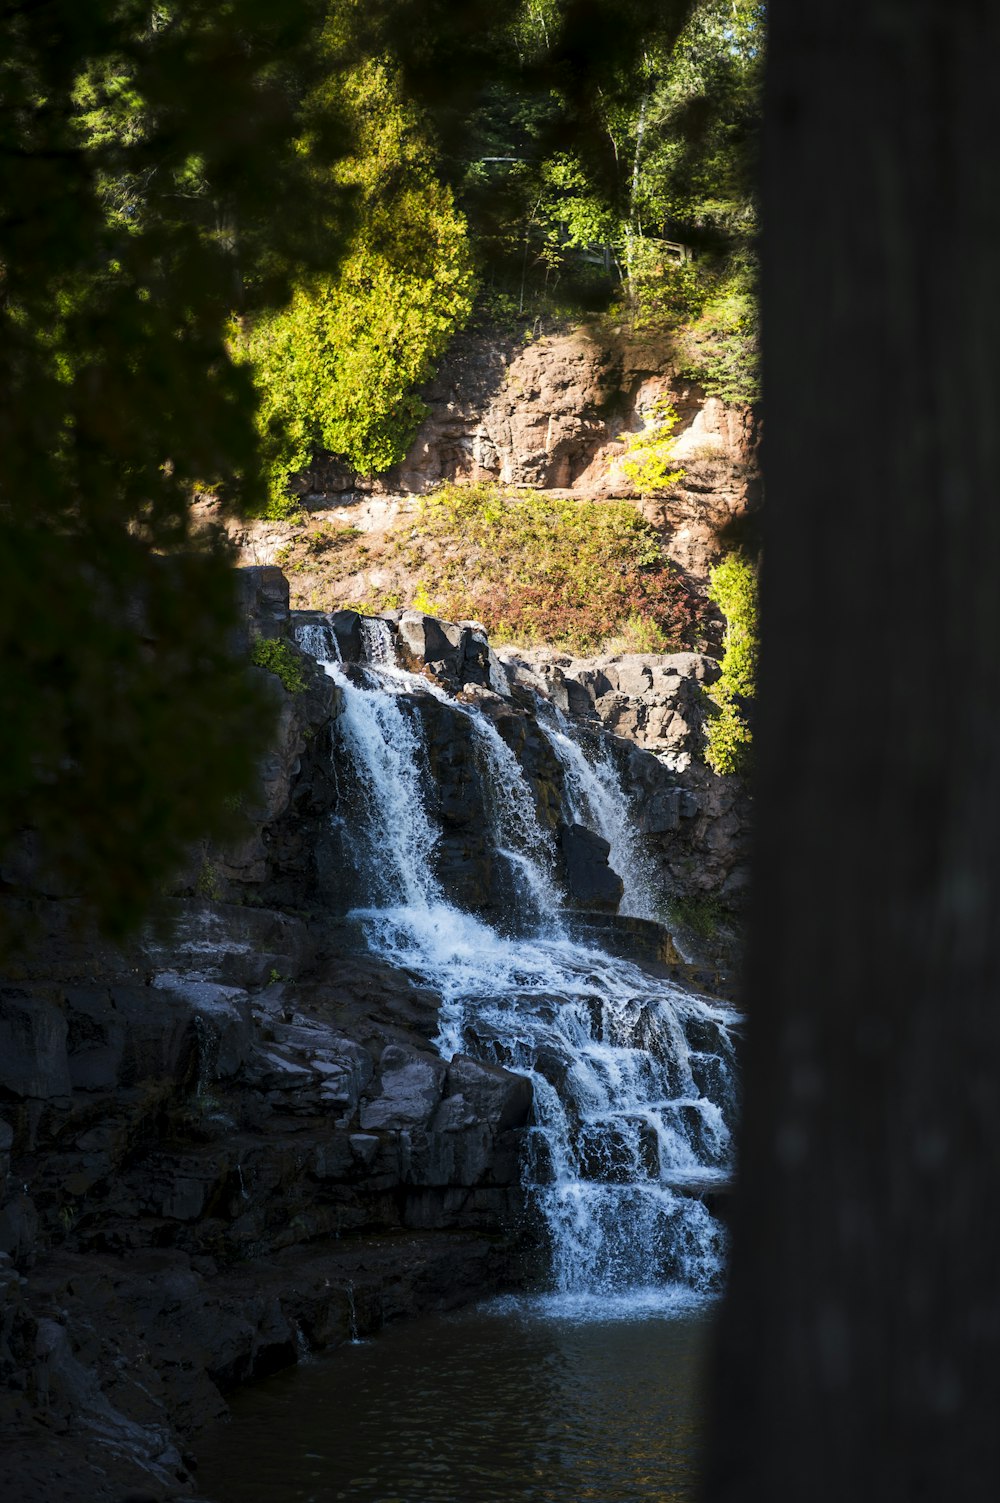 a waterfall is seen through the trees near a body of water